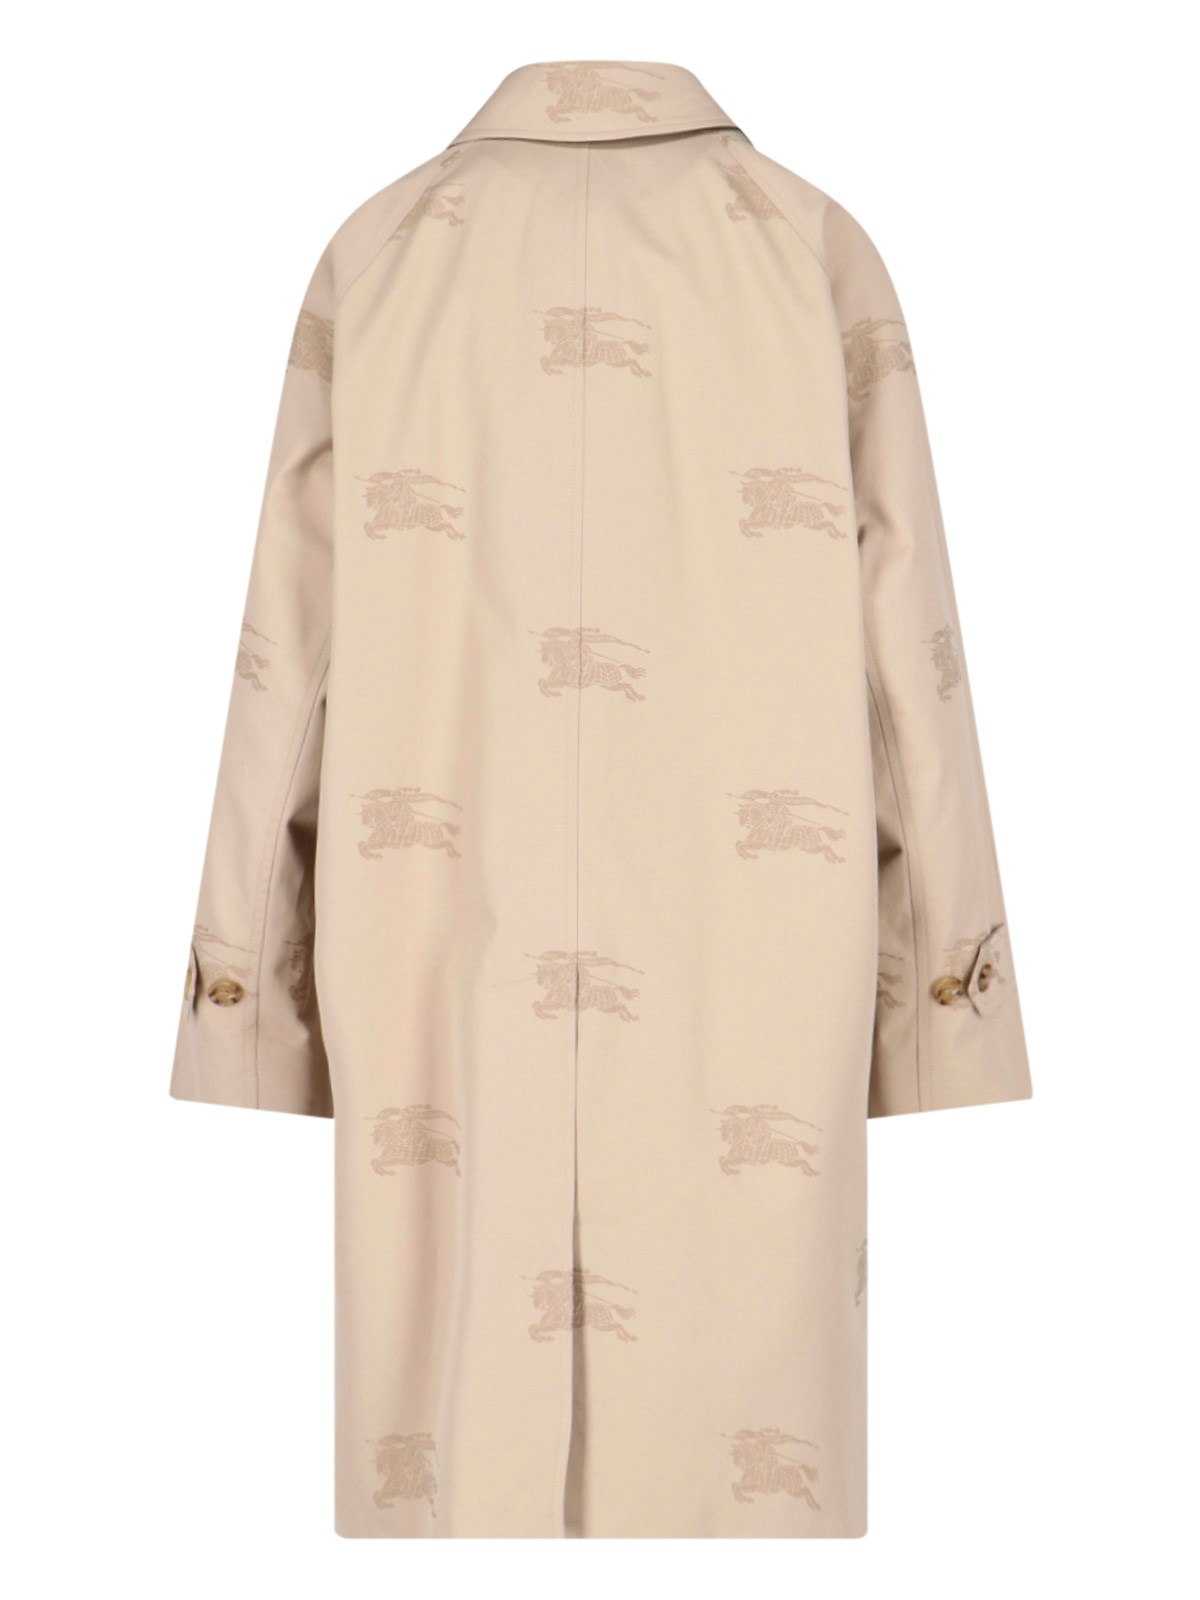 Burberry 'equestrian knight' trench coat available on SUGAR - 119095